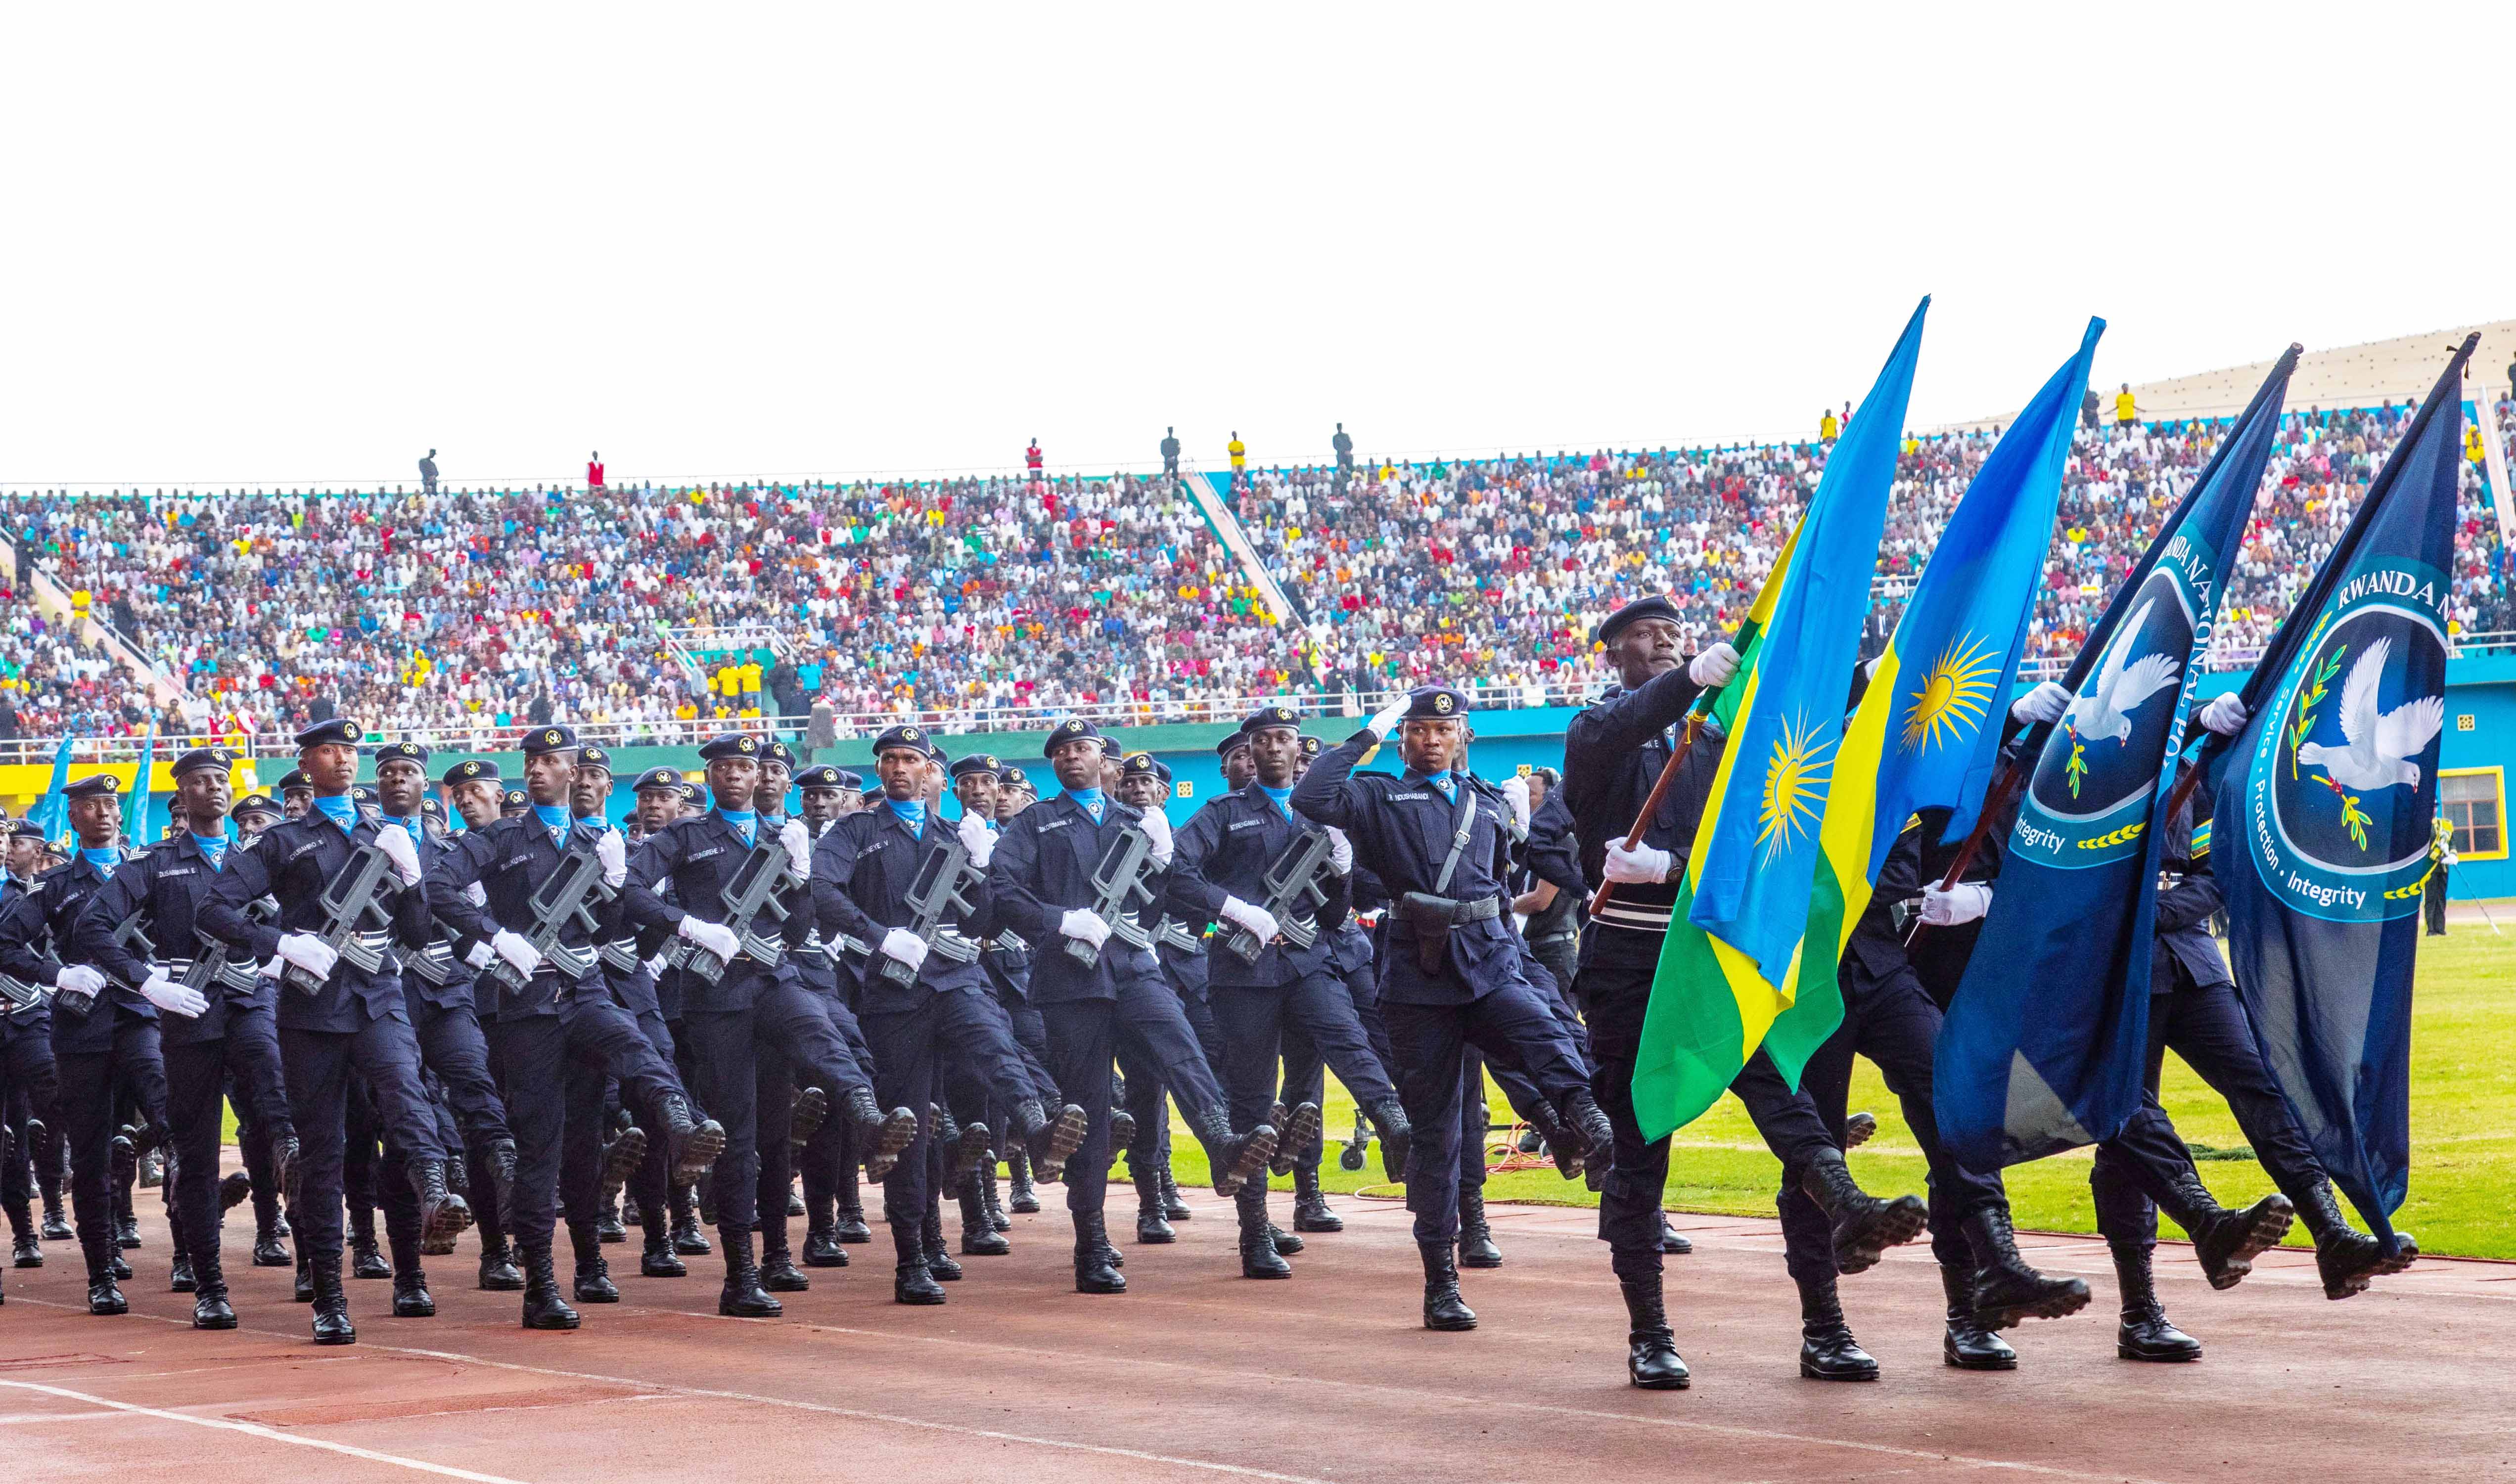 Over 4,500 police officers promoted